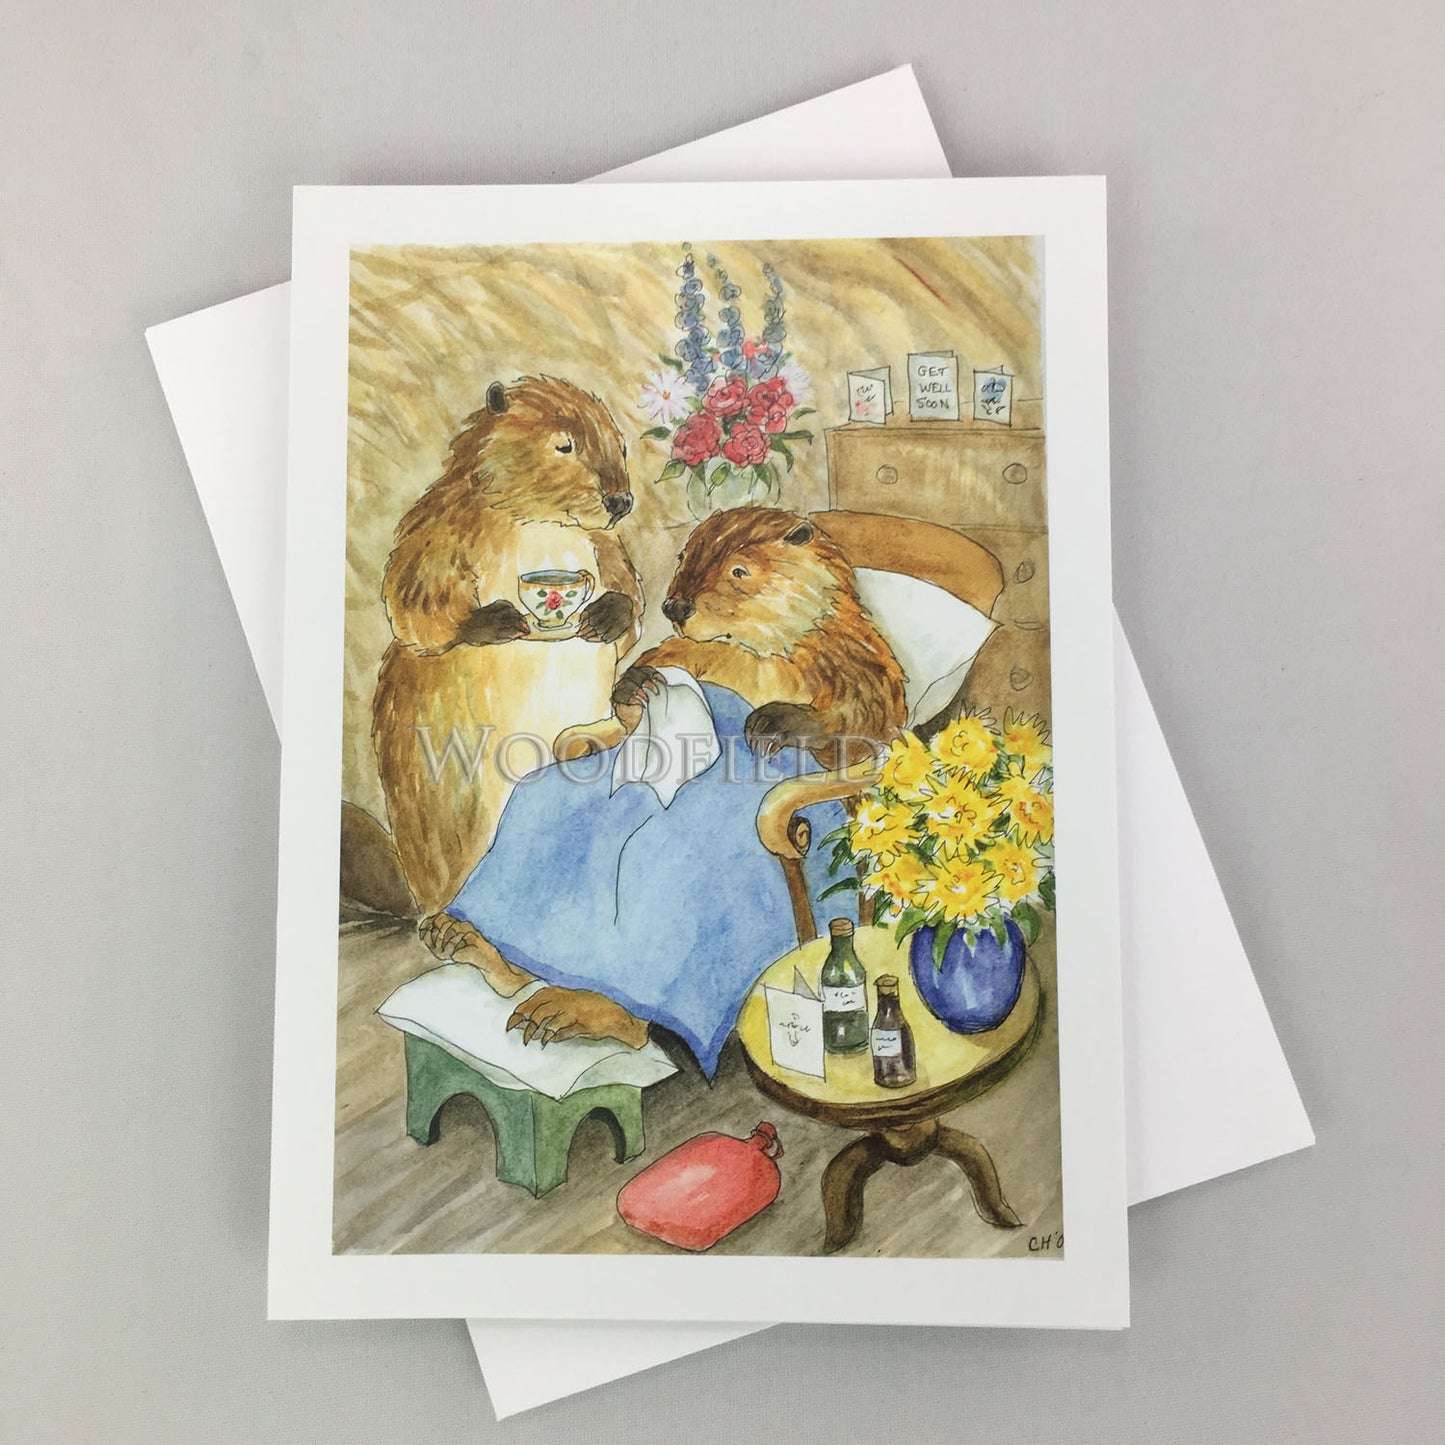 Get Well - Greeting Card by Woodfield Press